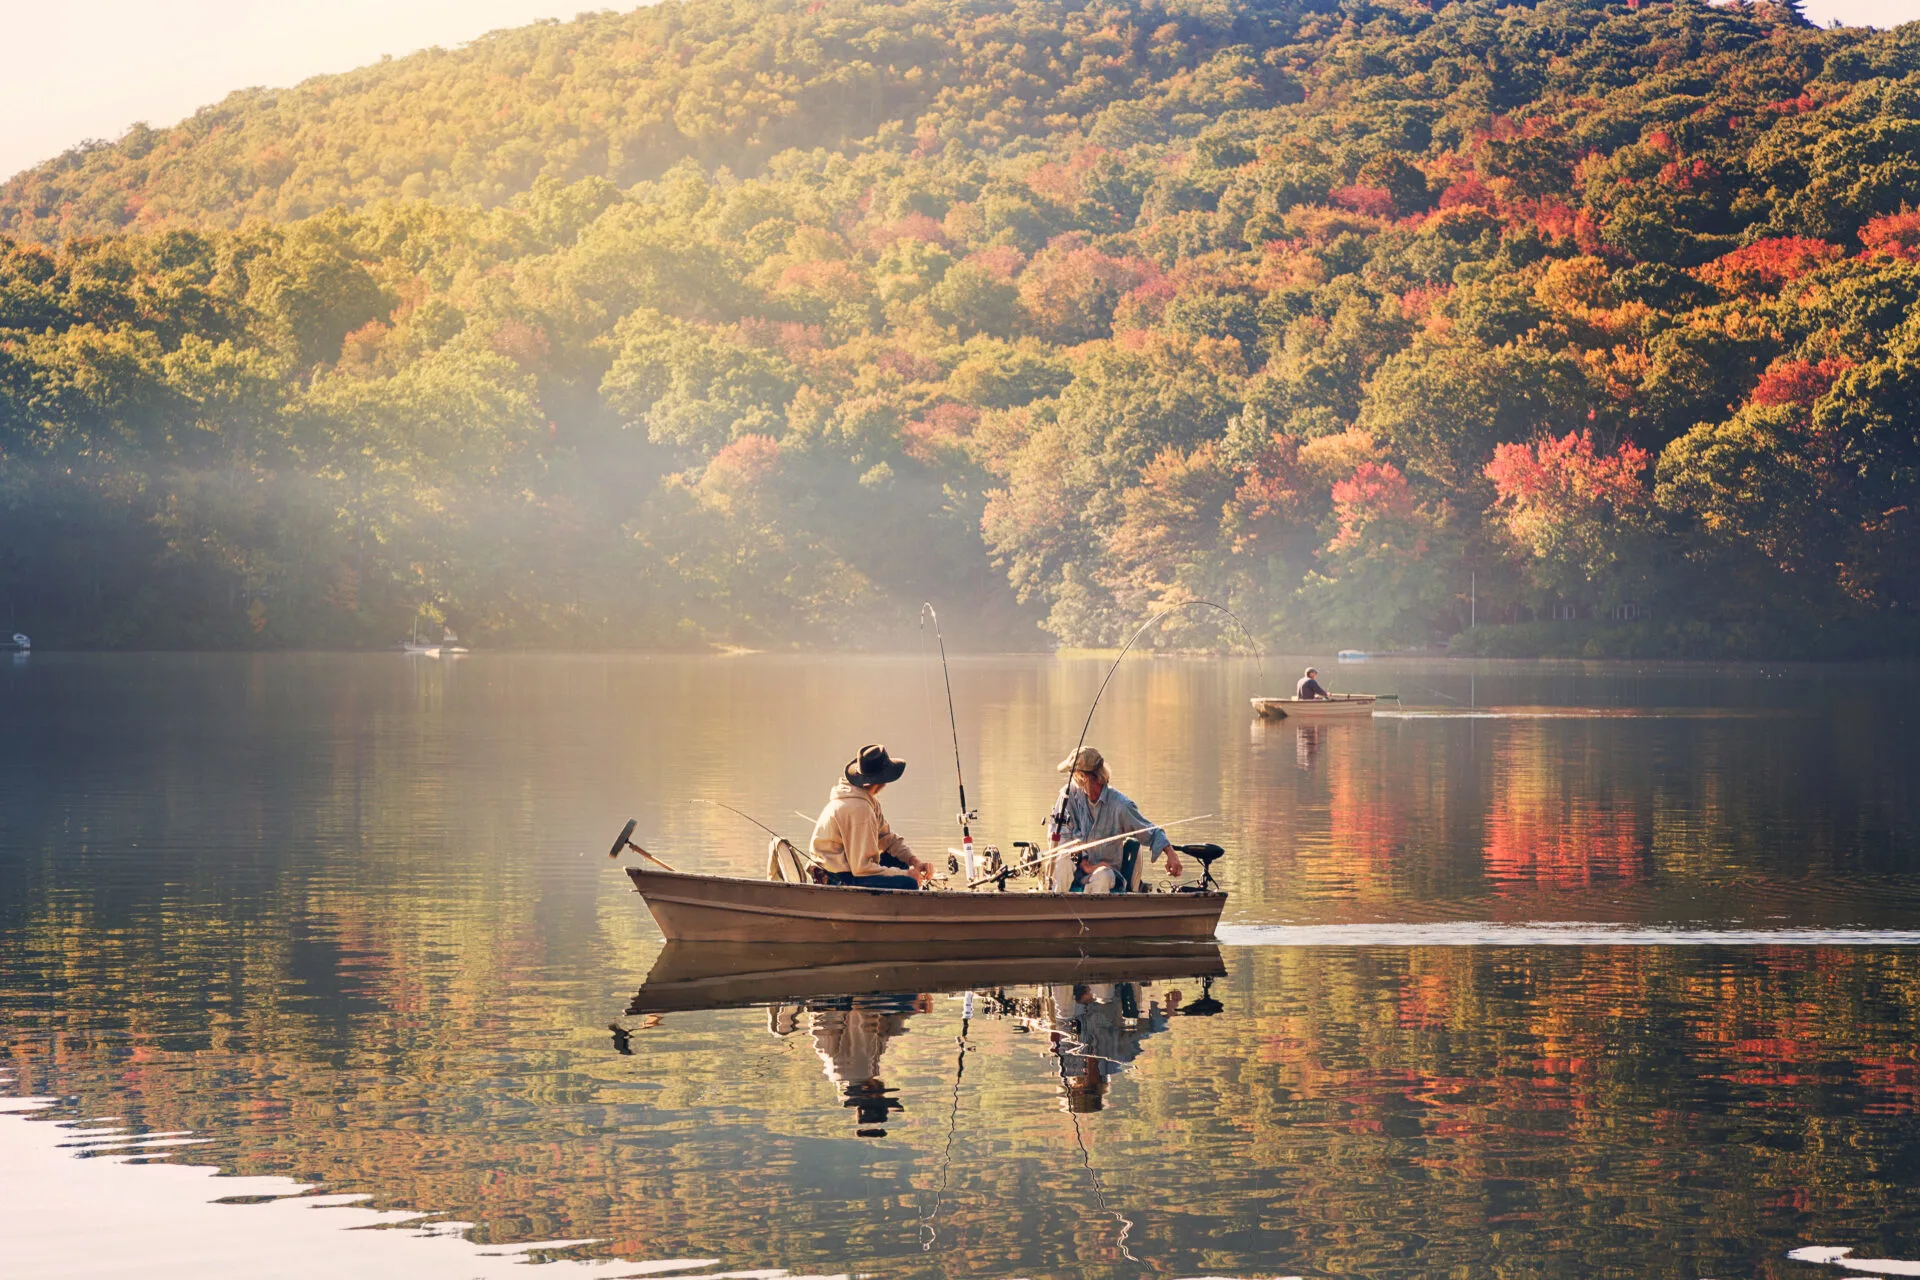 image of people on boat in lake fishing in Connecticut.